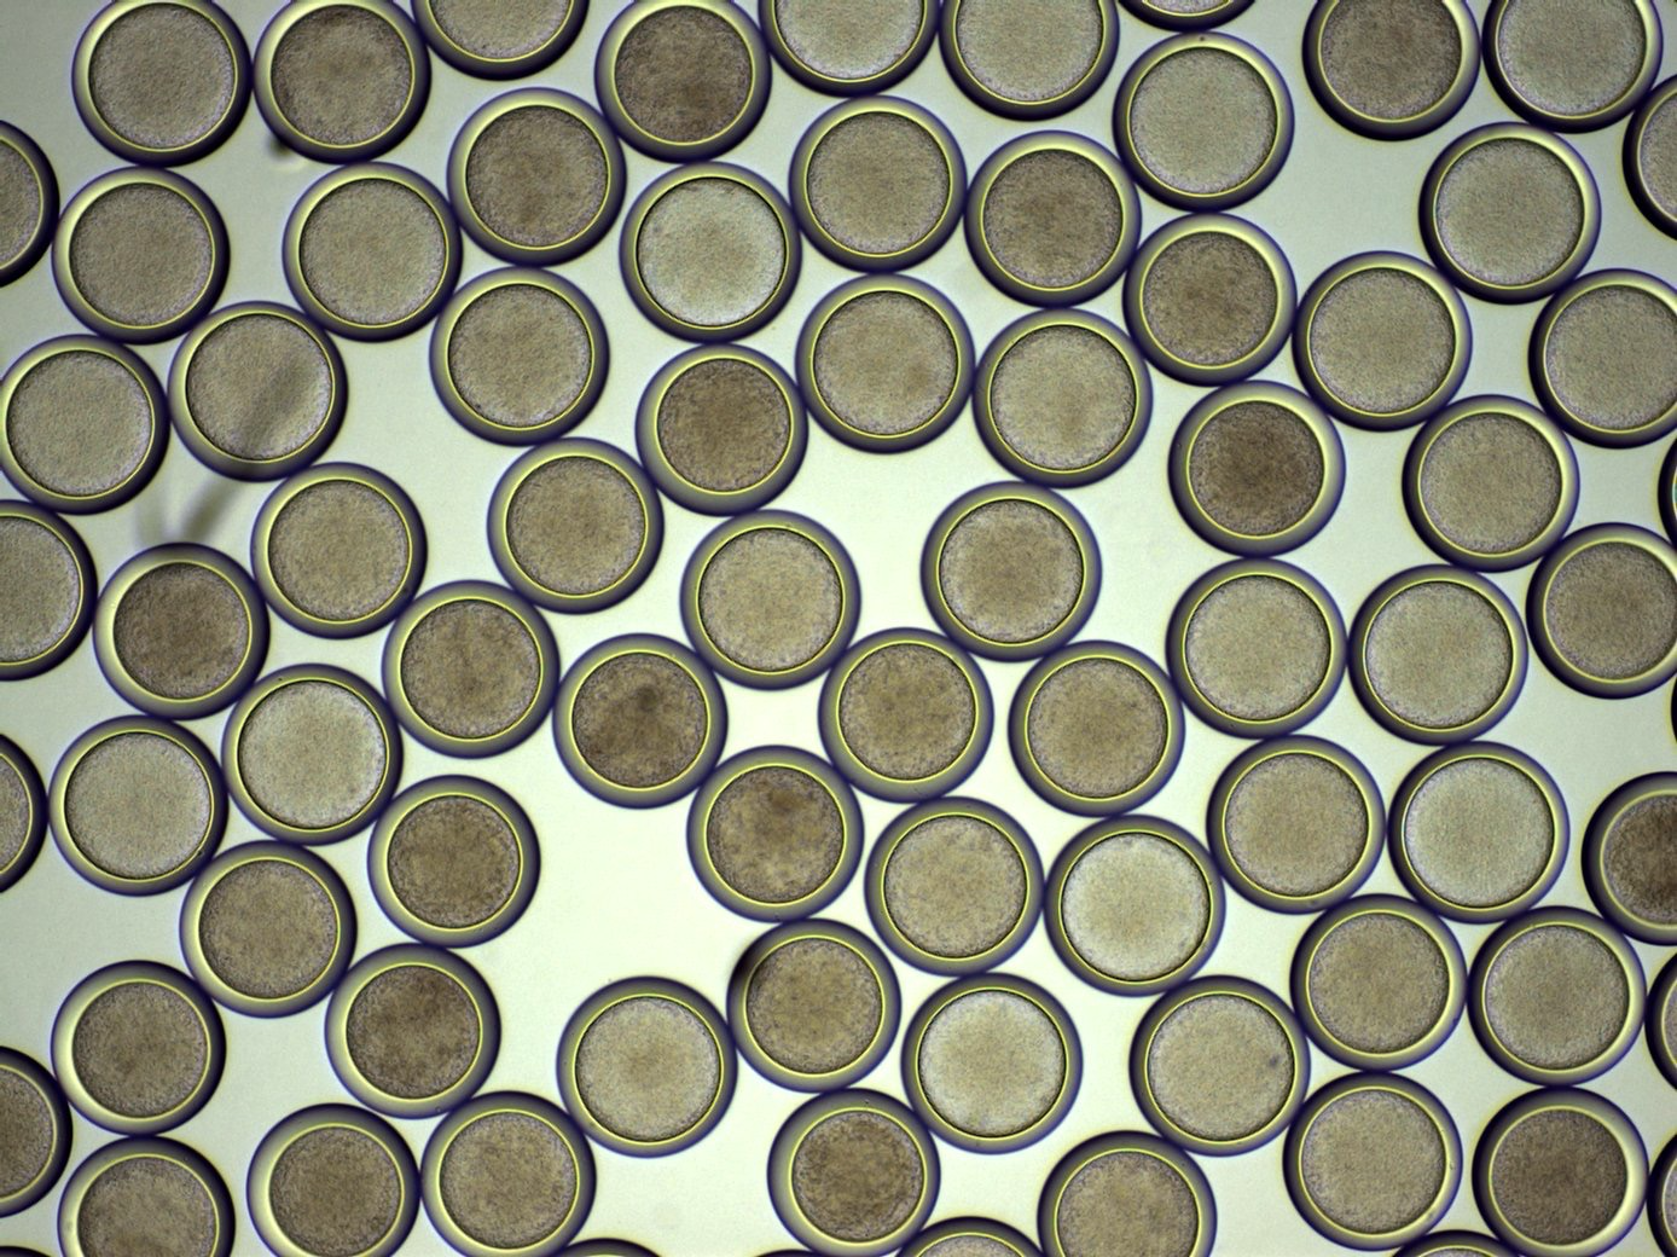 microscopic image of round nanoparticles